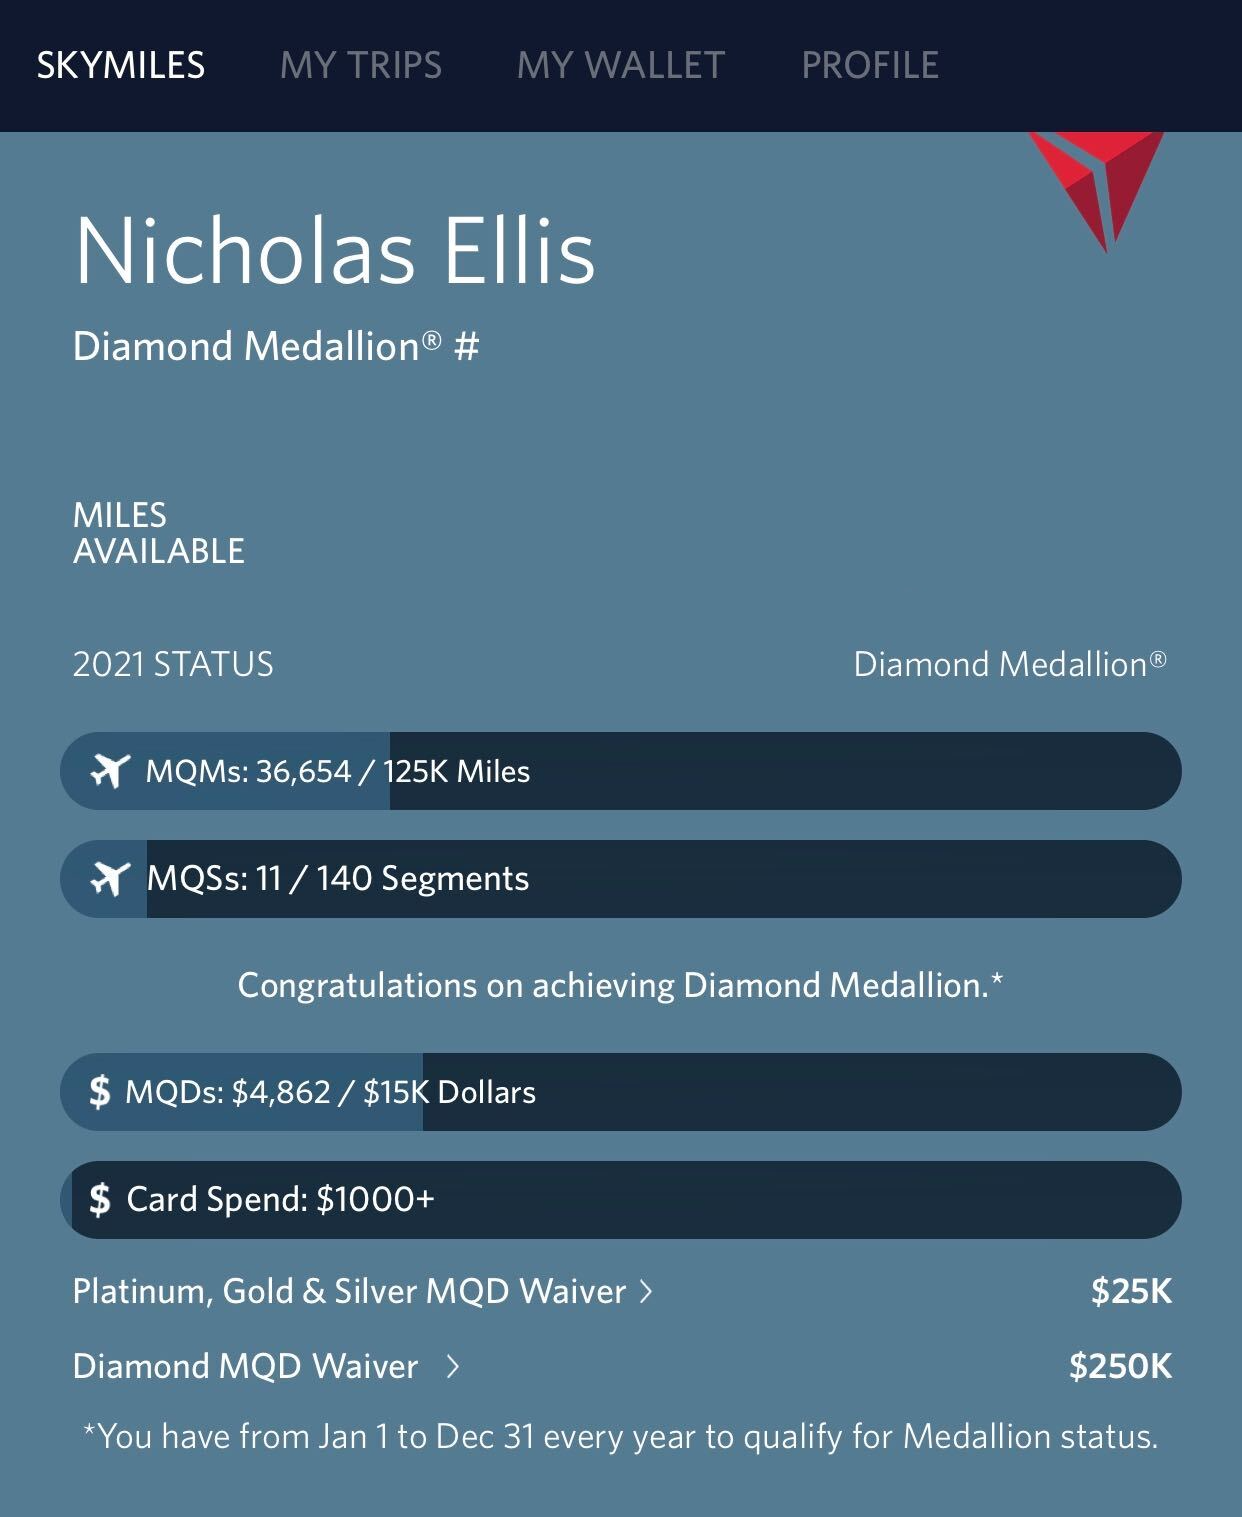 Delta rolls out extended Medallion status well ahead of schedule The